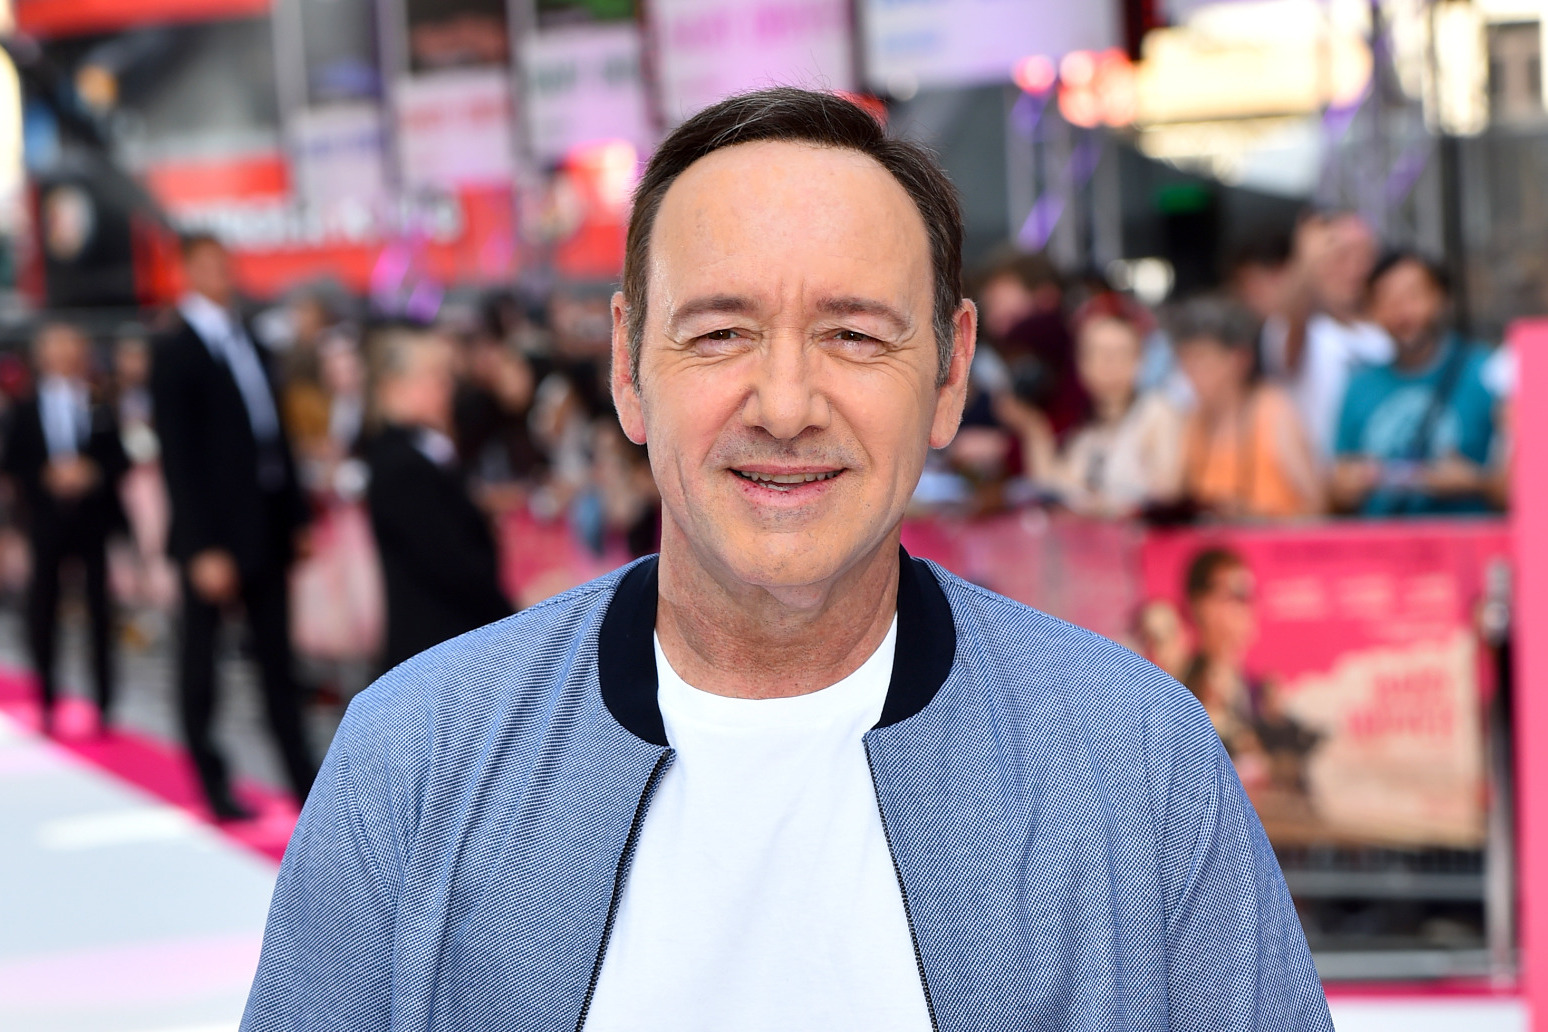 Kevin Spacey to ‘voluntarily appear’ in UK court following assault allegations 